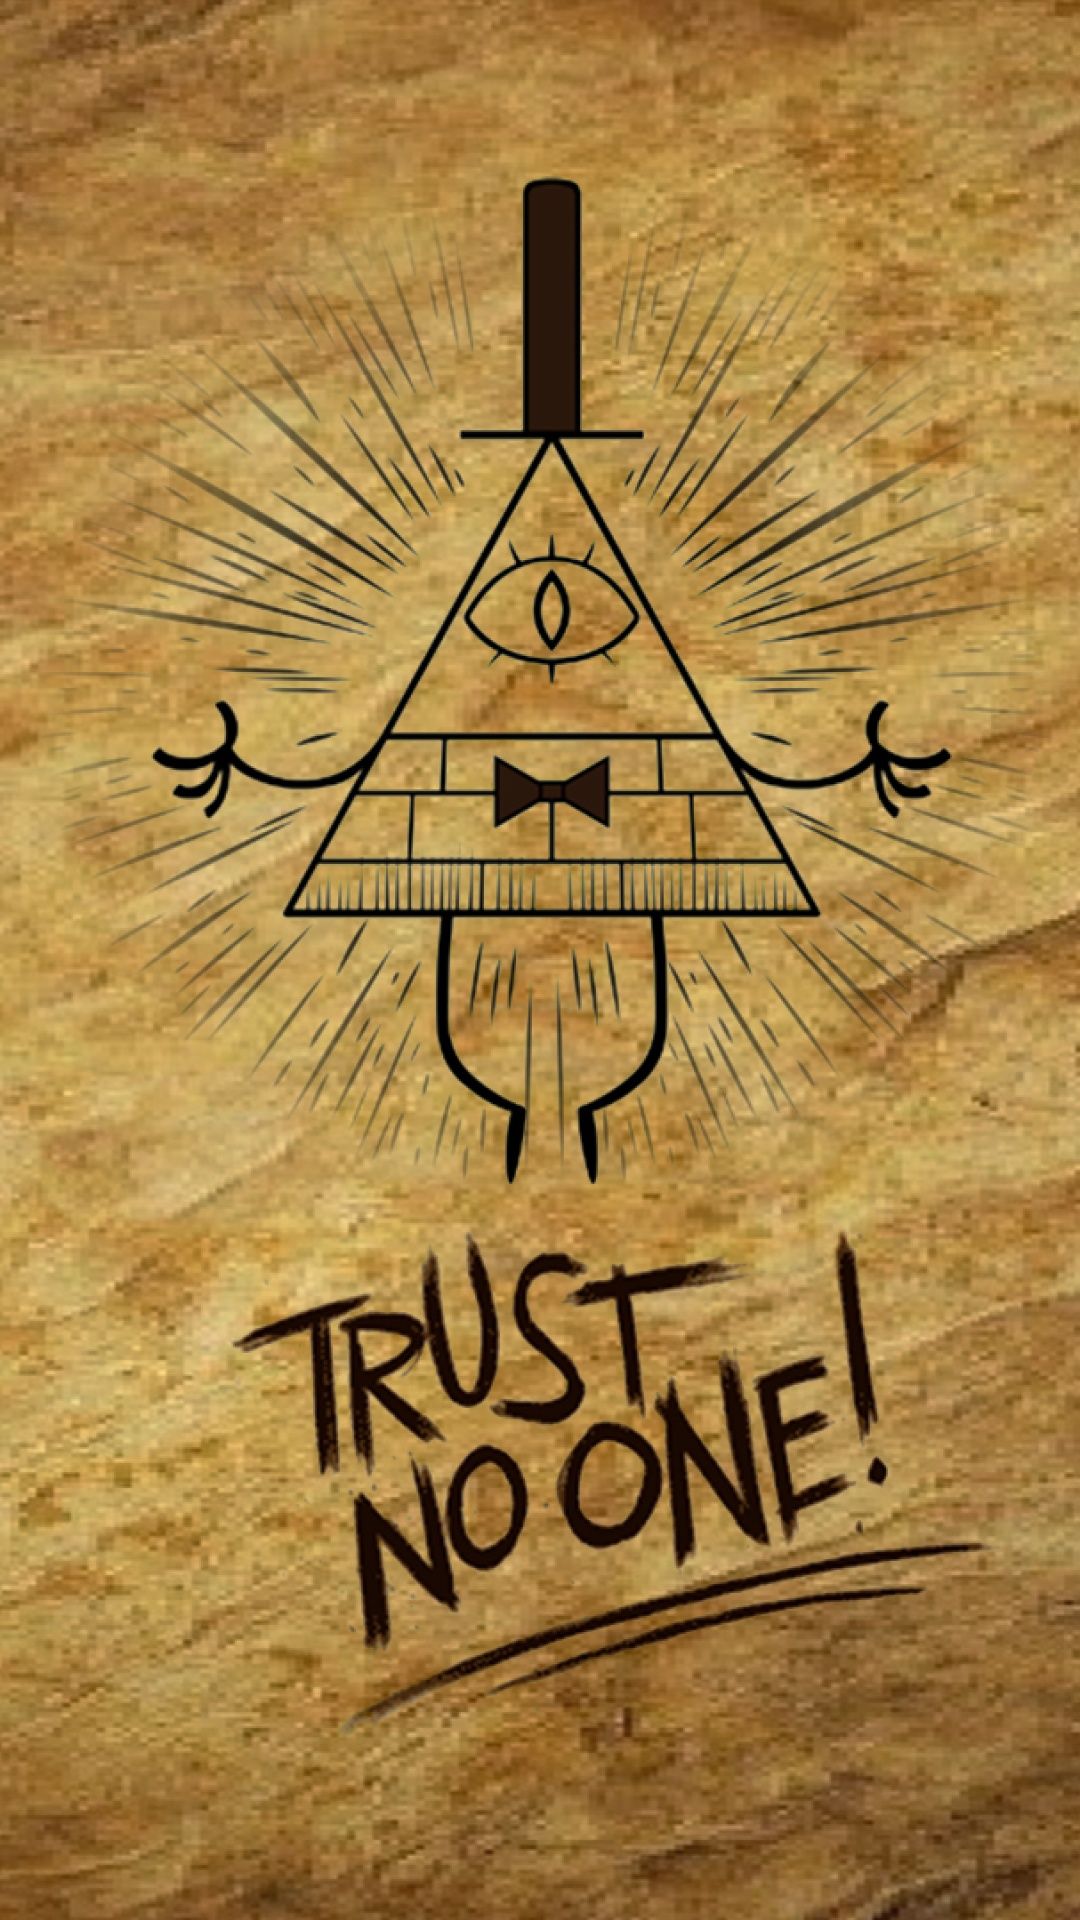 Trust no one rphonewallpapers